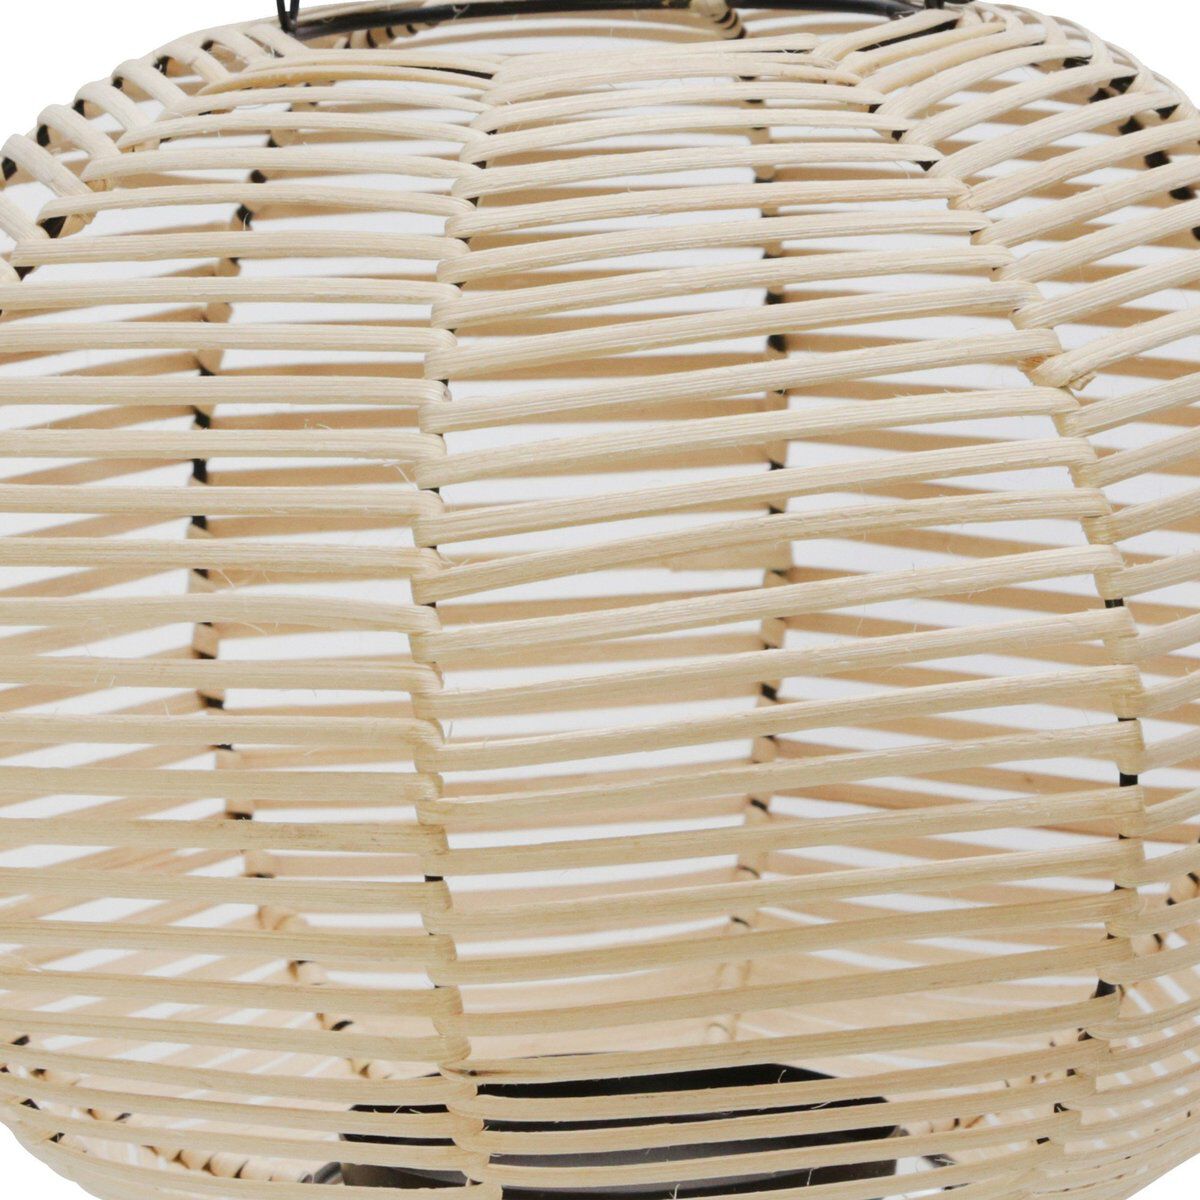 Woven Wicker Lantern with Bellied Metal Frame and Handle, Beige and Black